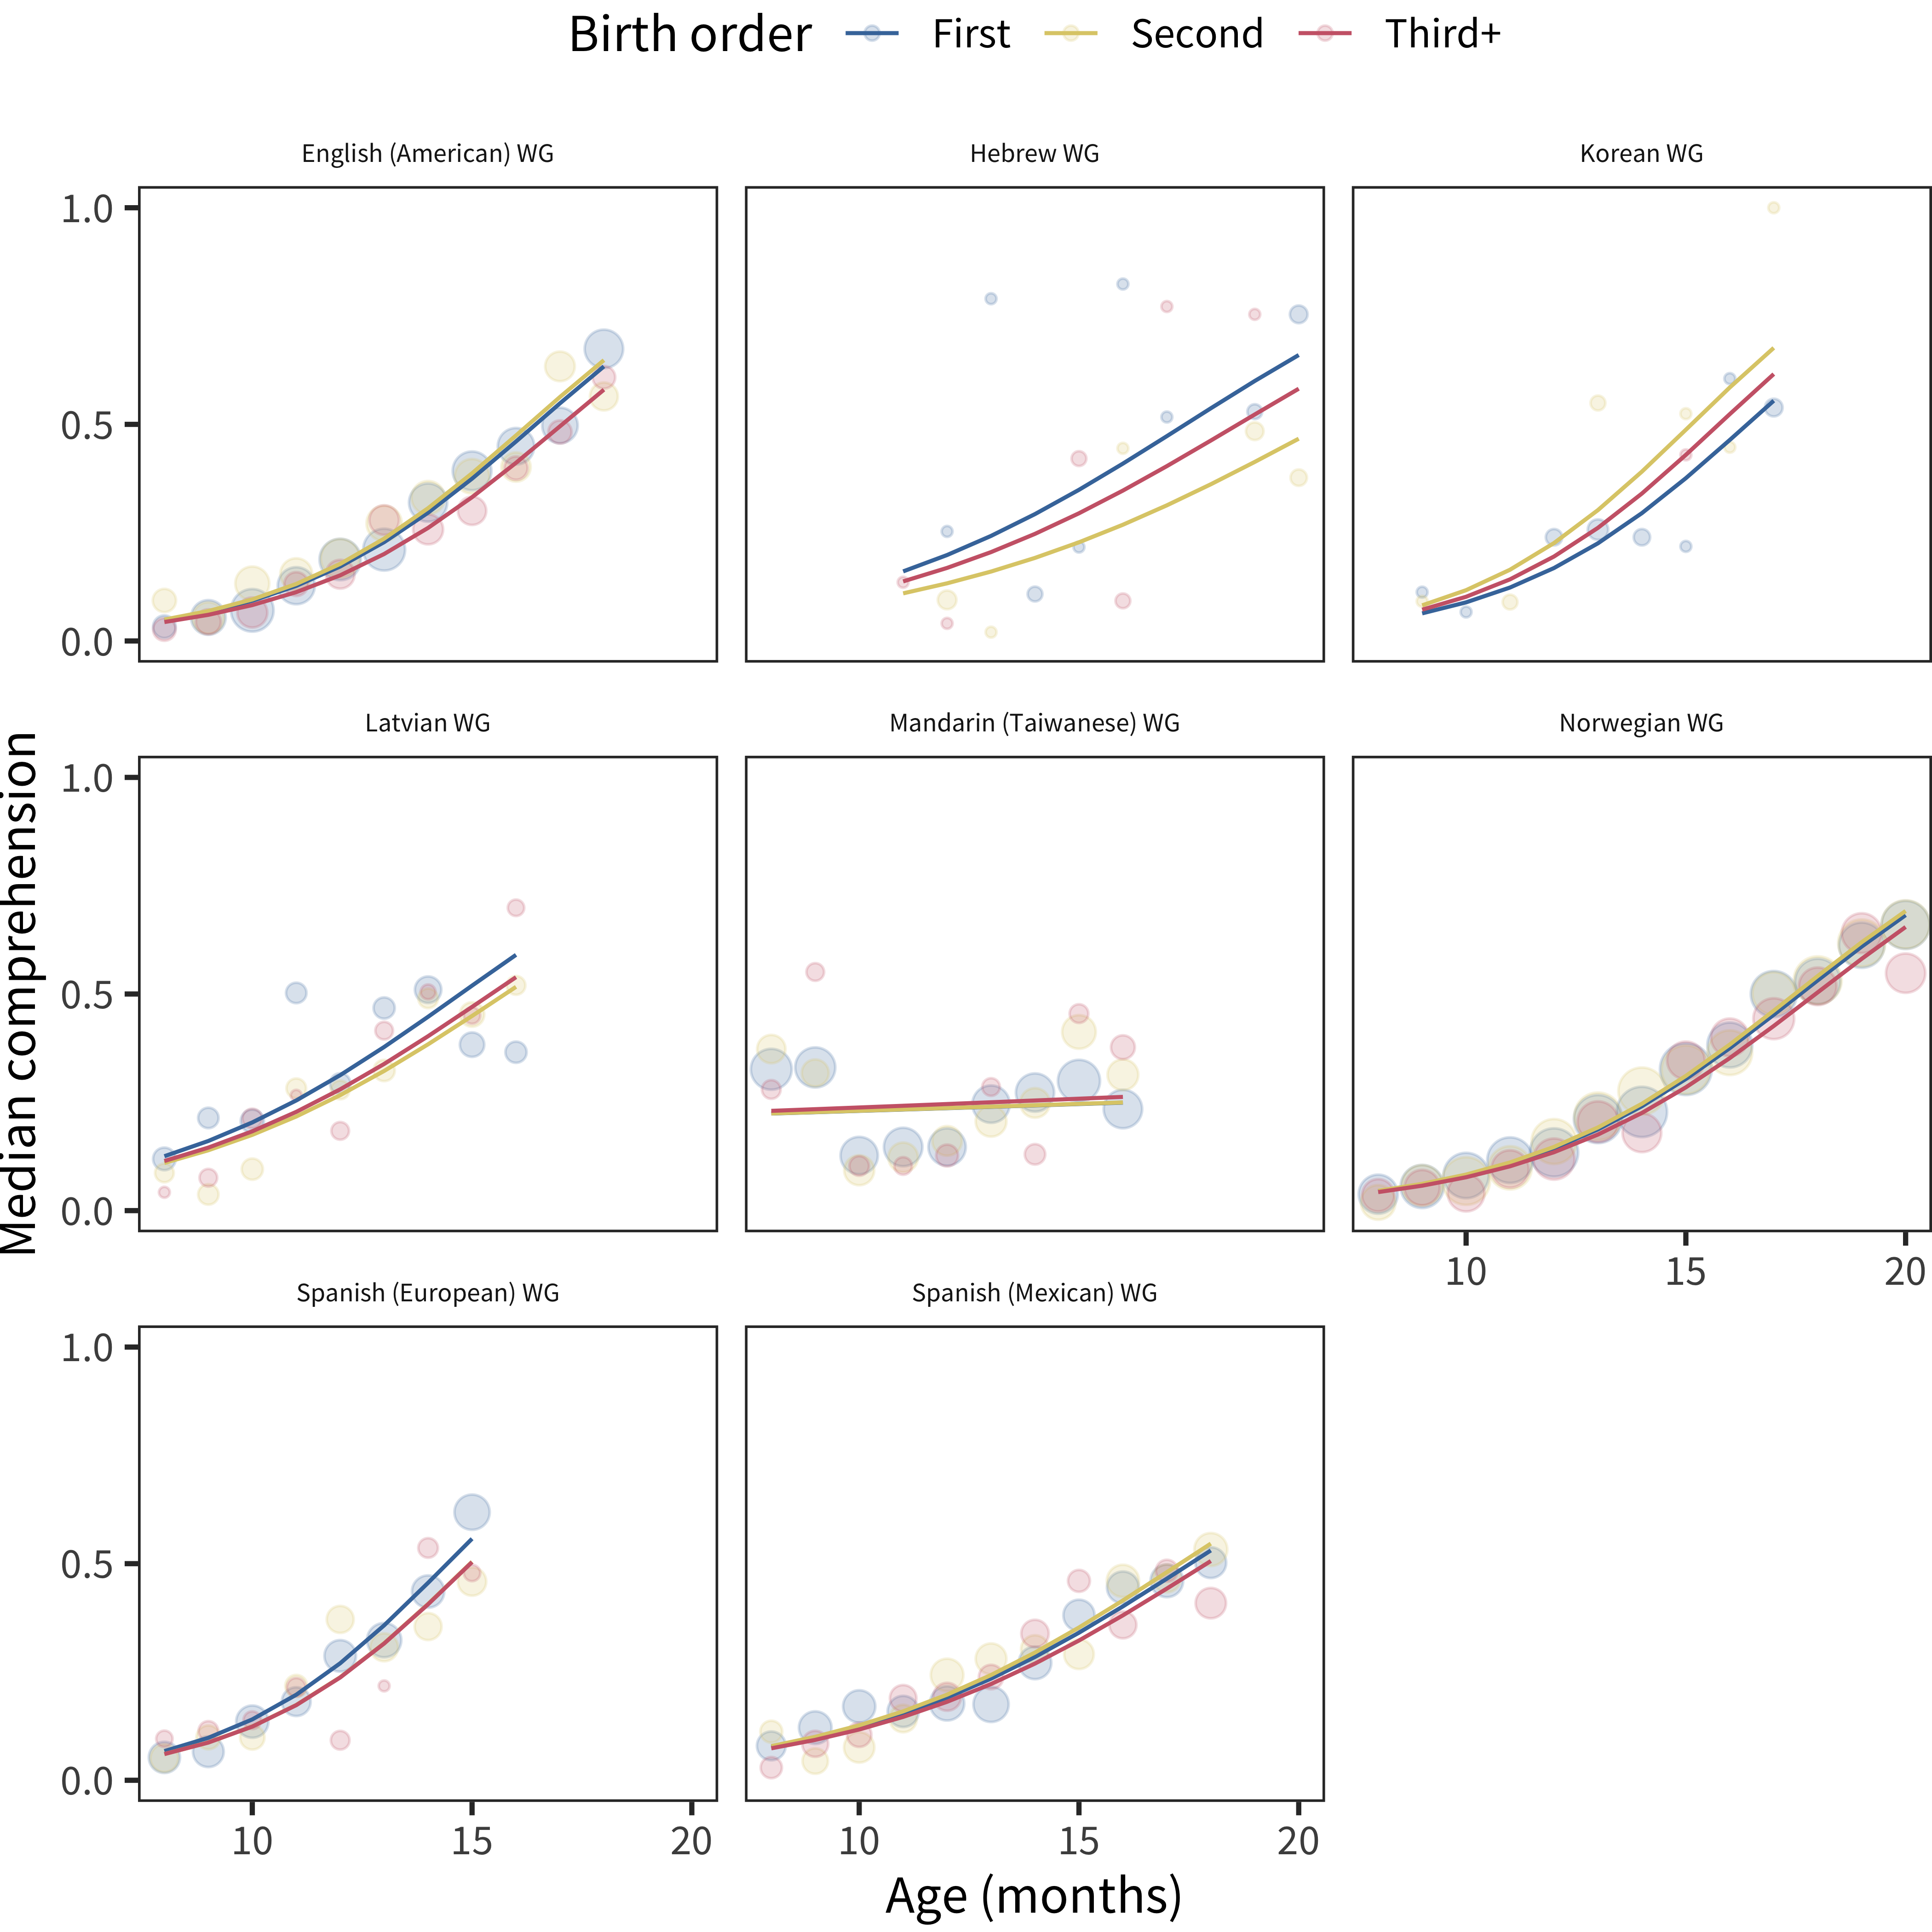 Differences in WG comprehension scores by birth order, plotted across age by language.